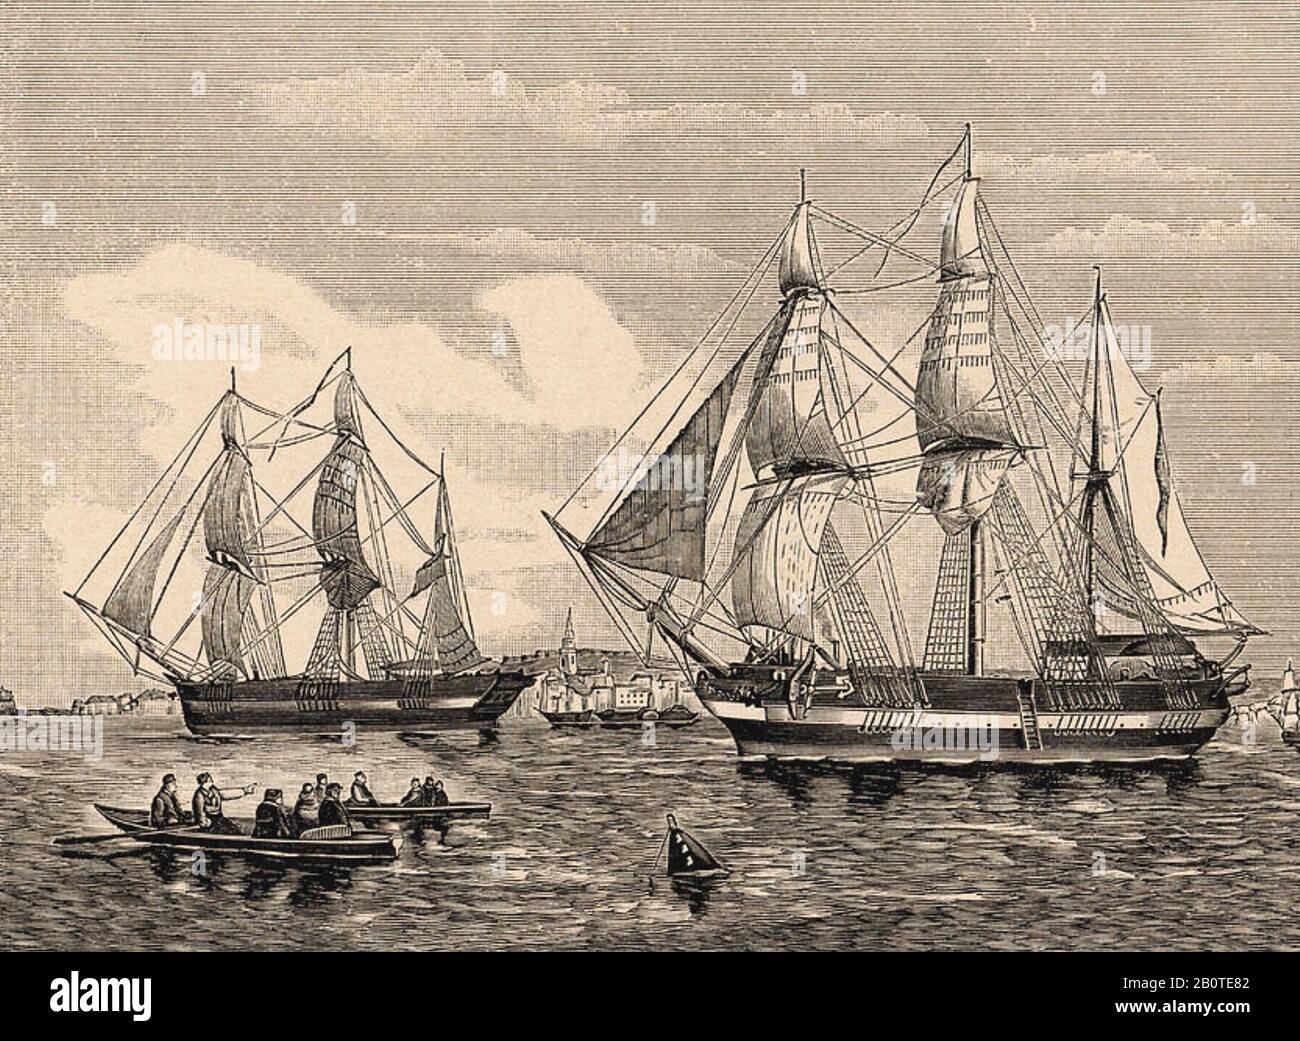 JOHN FRANKLIN (1786-1847) Royal Navy officer. HMS Erebus at right and HMS Terror  set sail from Greenhithe, England, on 19 May 1845 on their Northwest Passage expedition. Stock Photo